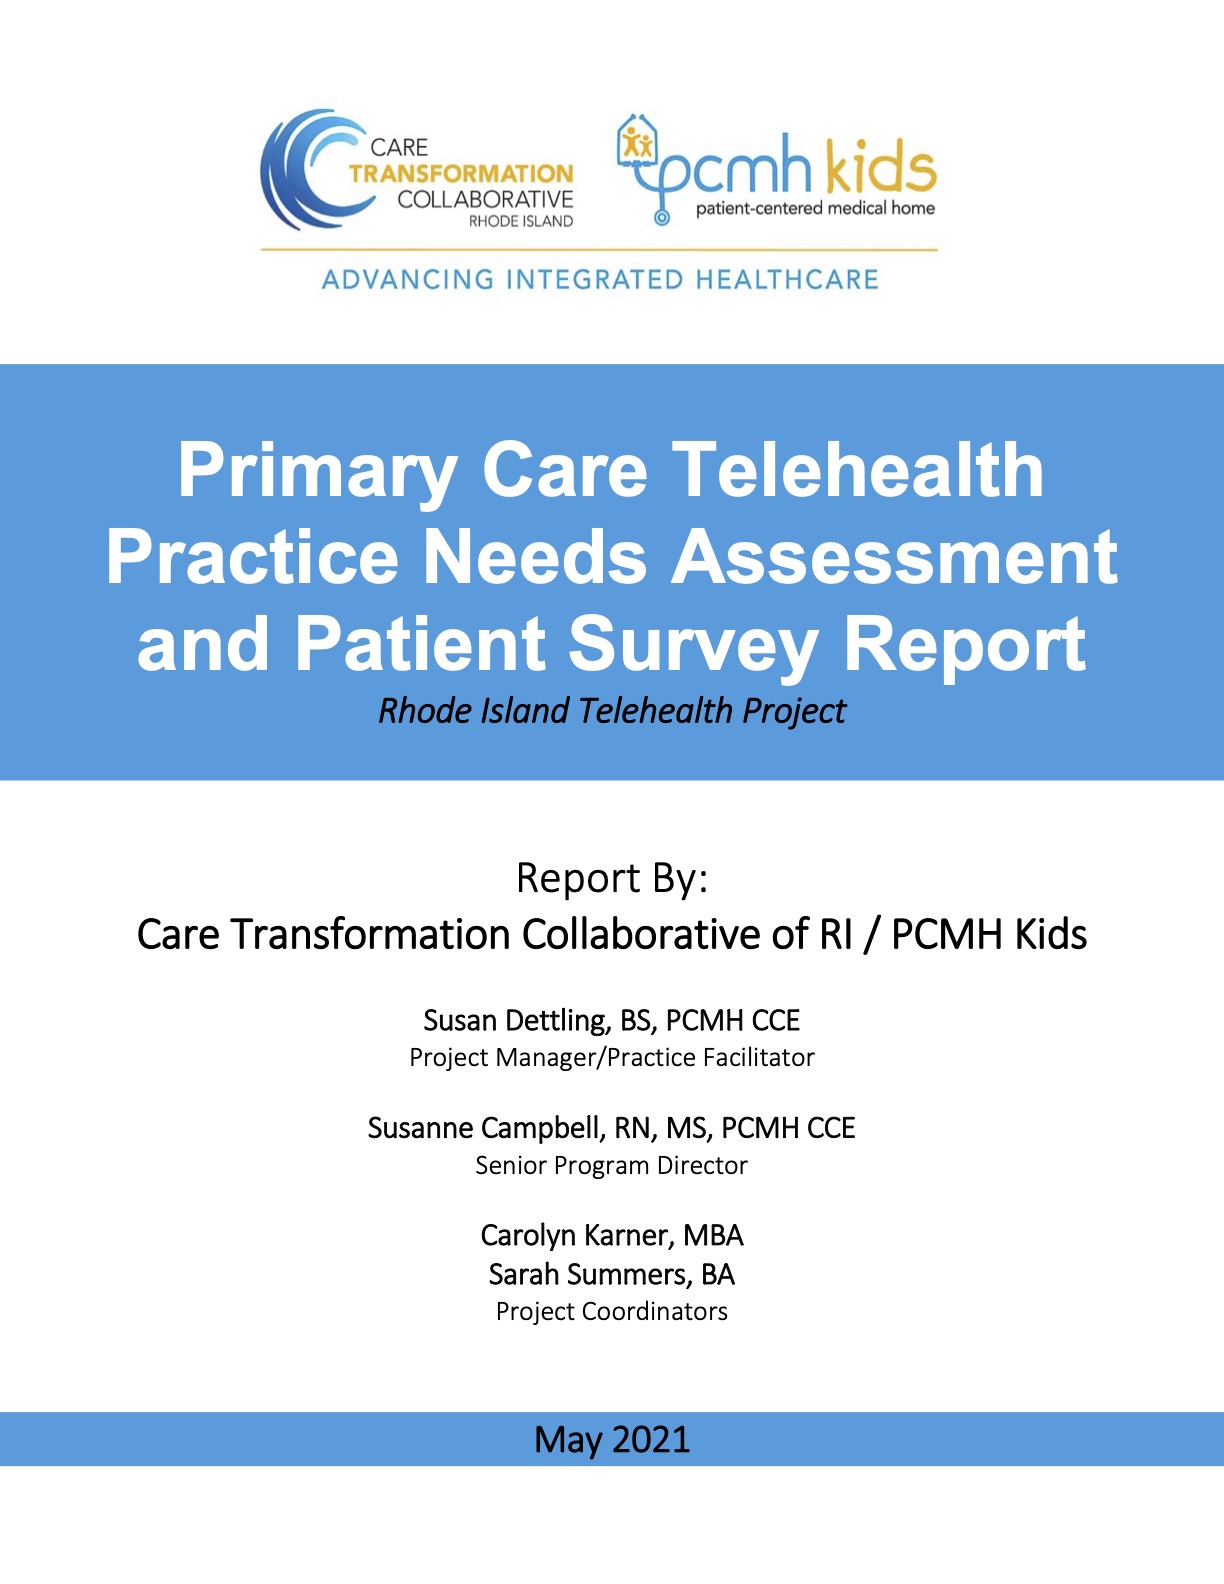 Primary Care Telehealth Practice Needs Assessment and Patient Survey Report